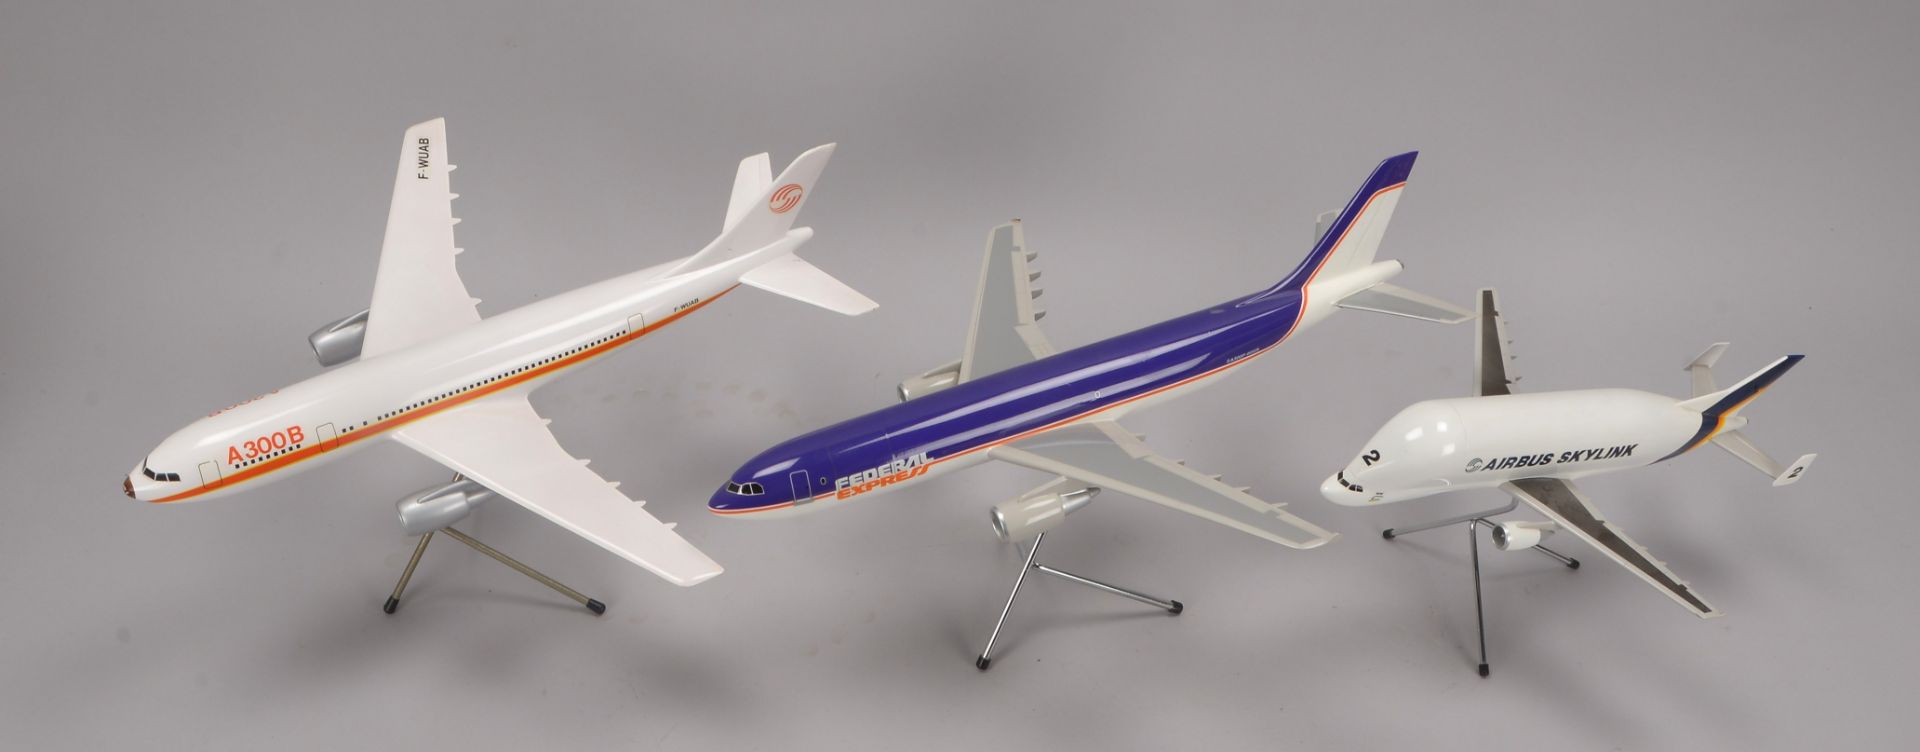 3x Flugzeugmodelle: Airbus &#039;Federal Express&#039;, &#039;Airbus Skylink &#039;Beluga 2&#039; un